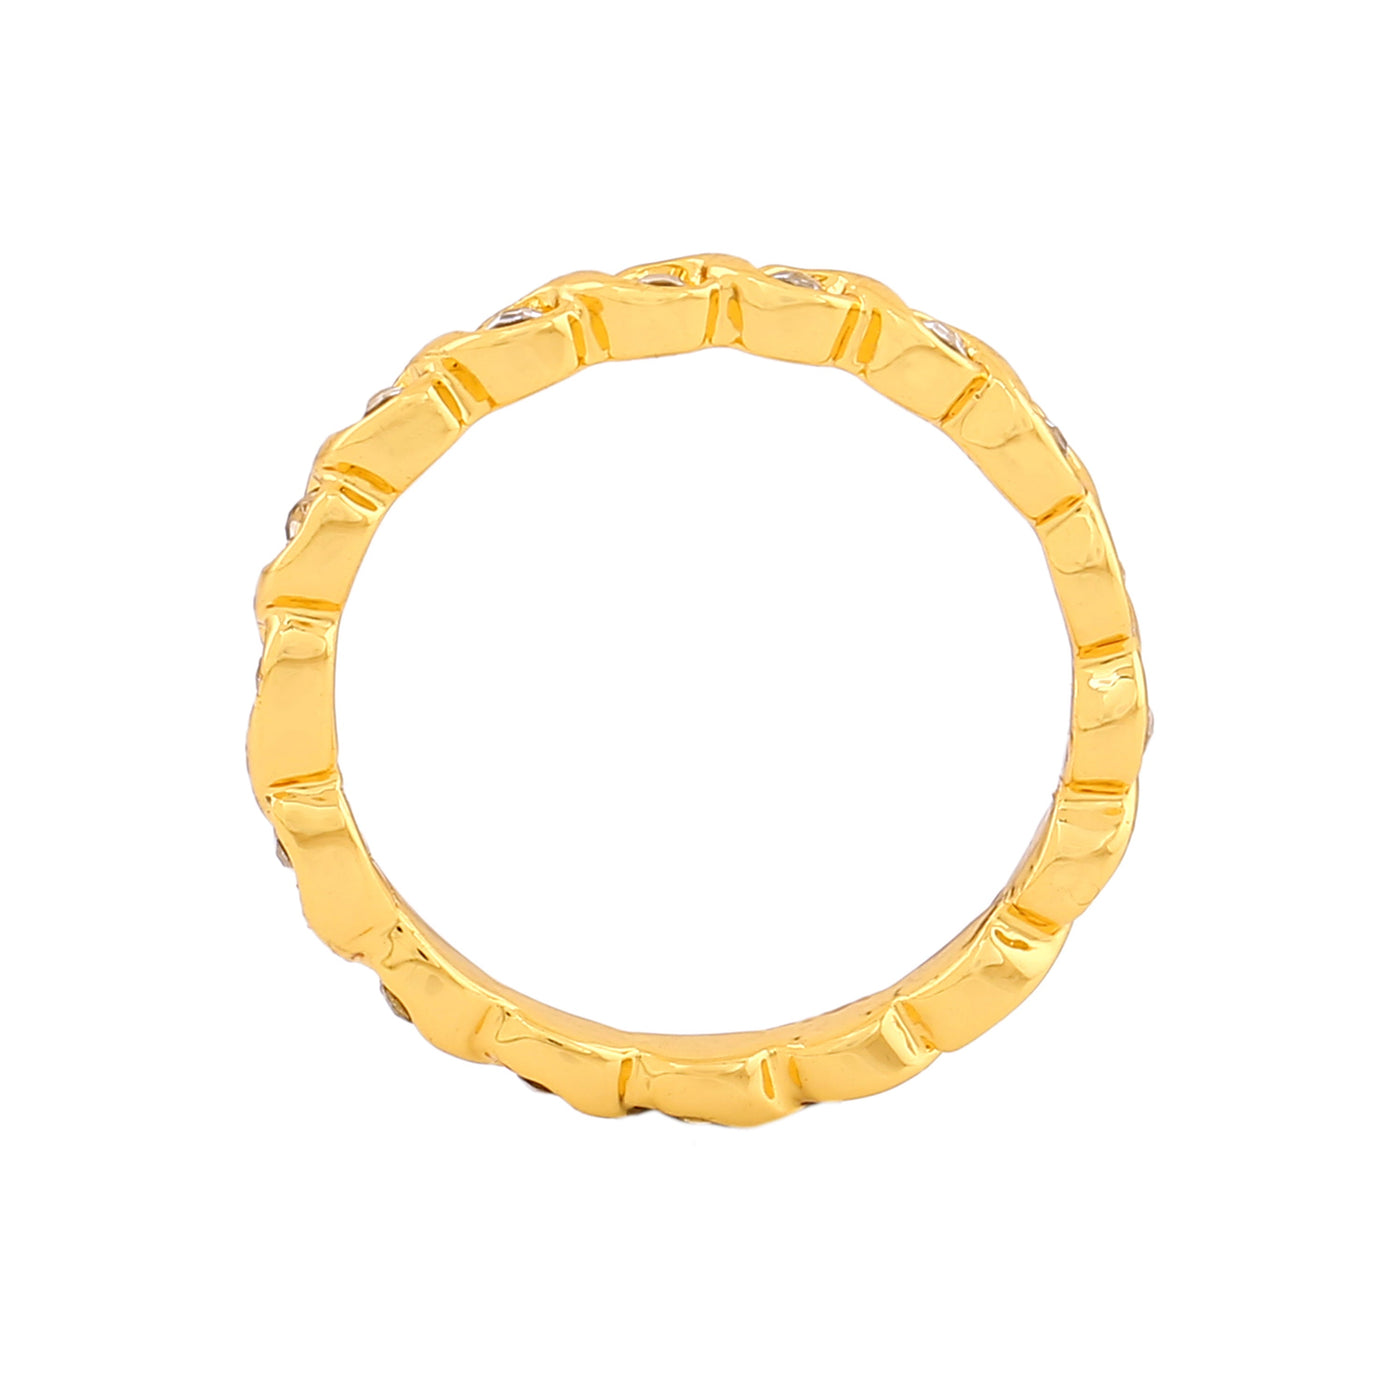 Estele Gold Plated Leaf Eternity Finger Ring with Crystals for Women